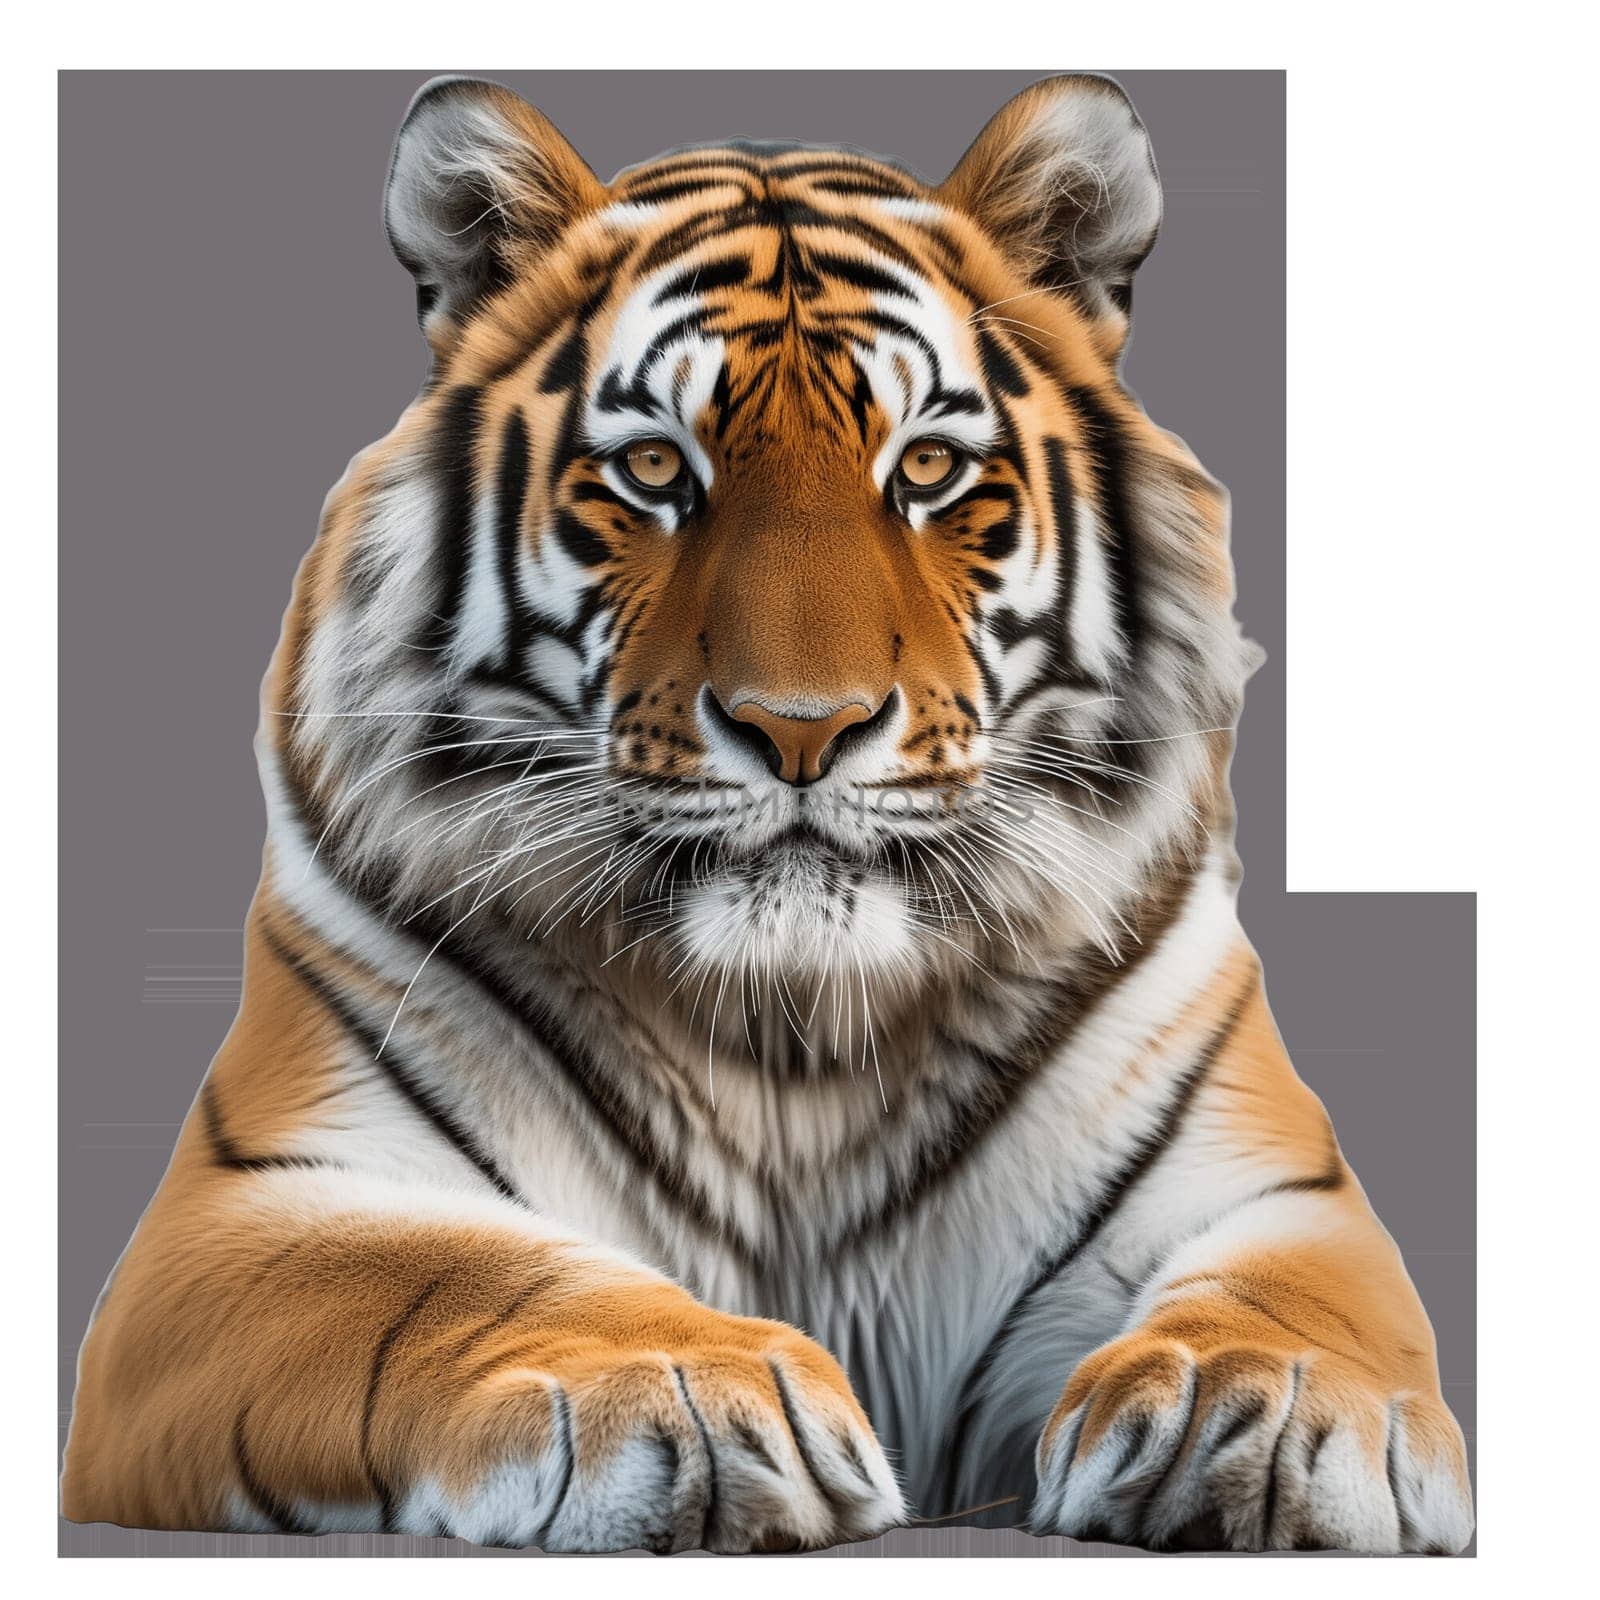 Amur wild tiger isolated image by Dustick